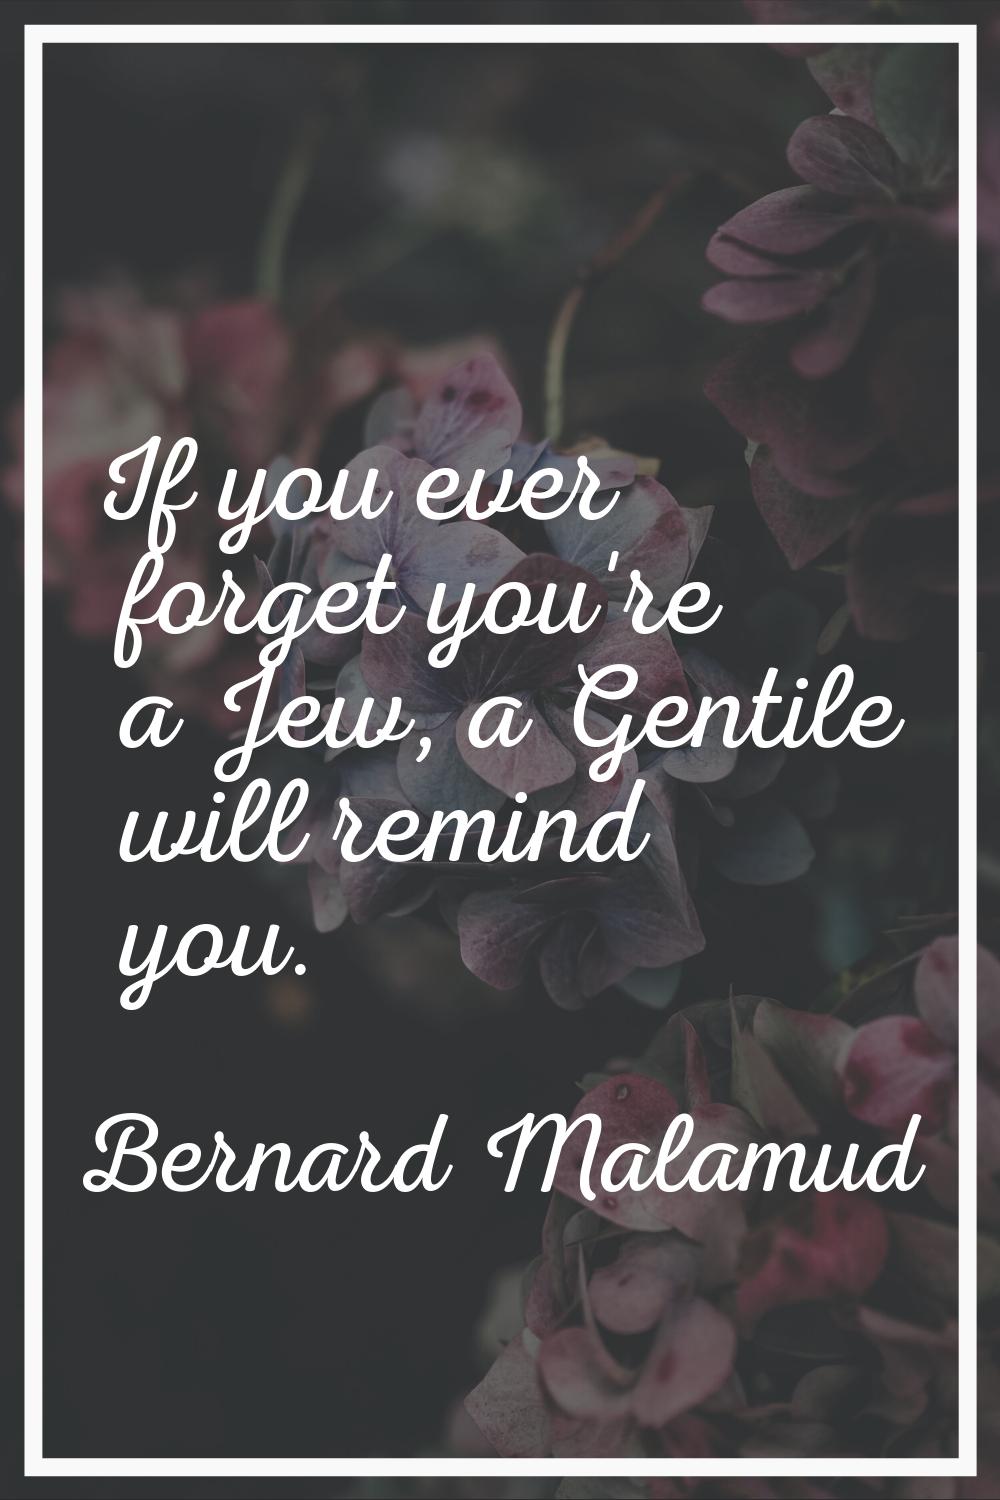 If you ever forget you're a Jew, a Gentile will remind you.